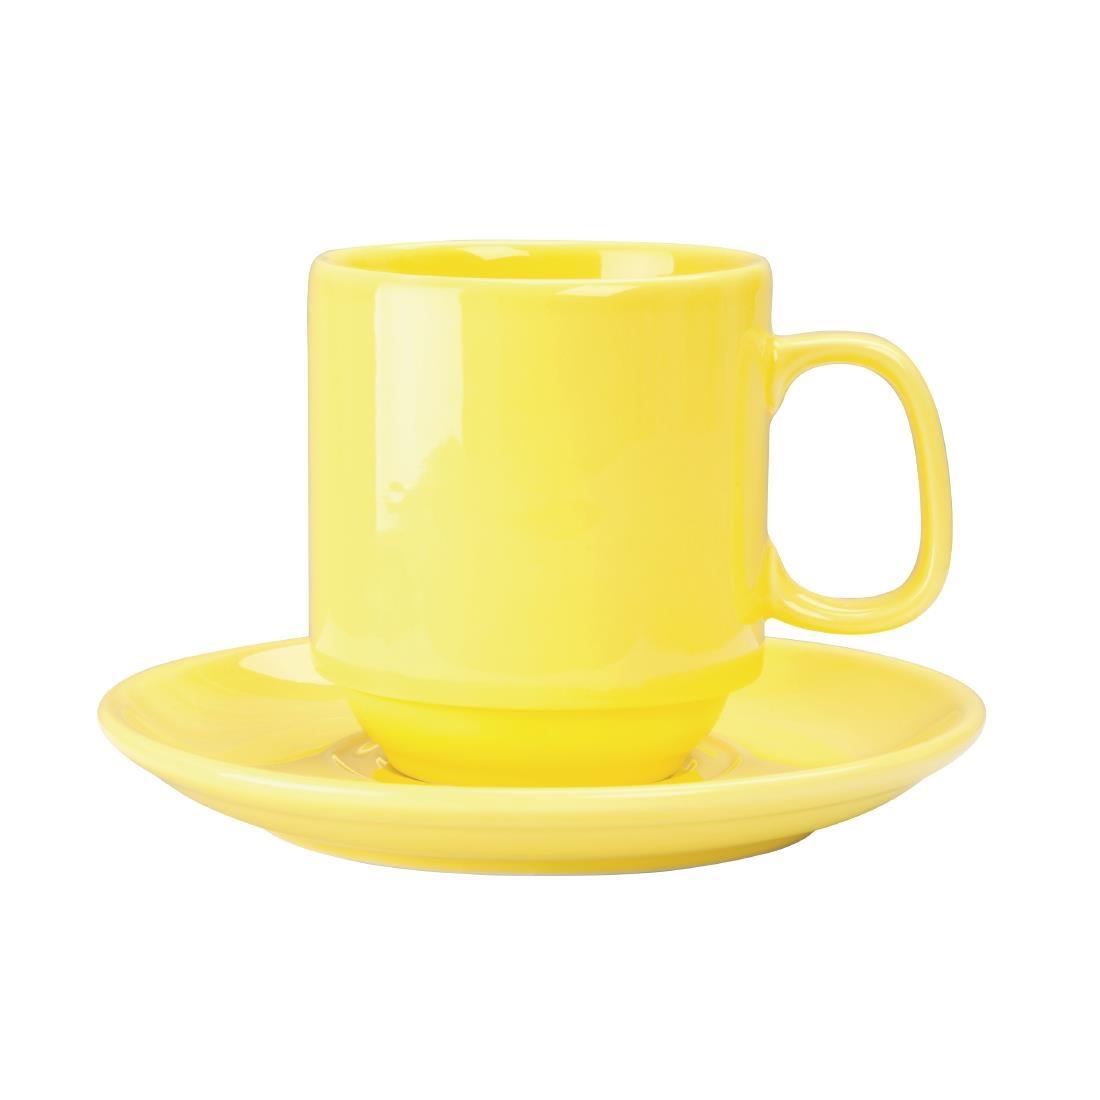 Olympia Heritage Double Well Saucers Yellow 163mm (Pack of 6) - DW151  - 3